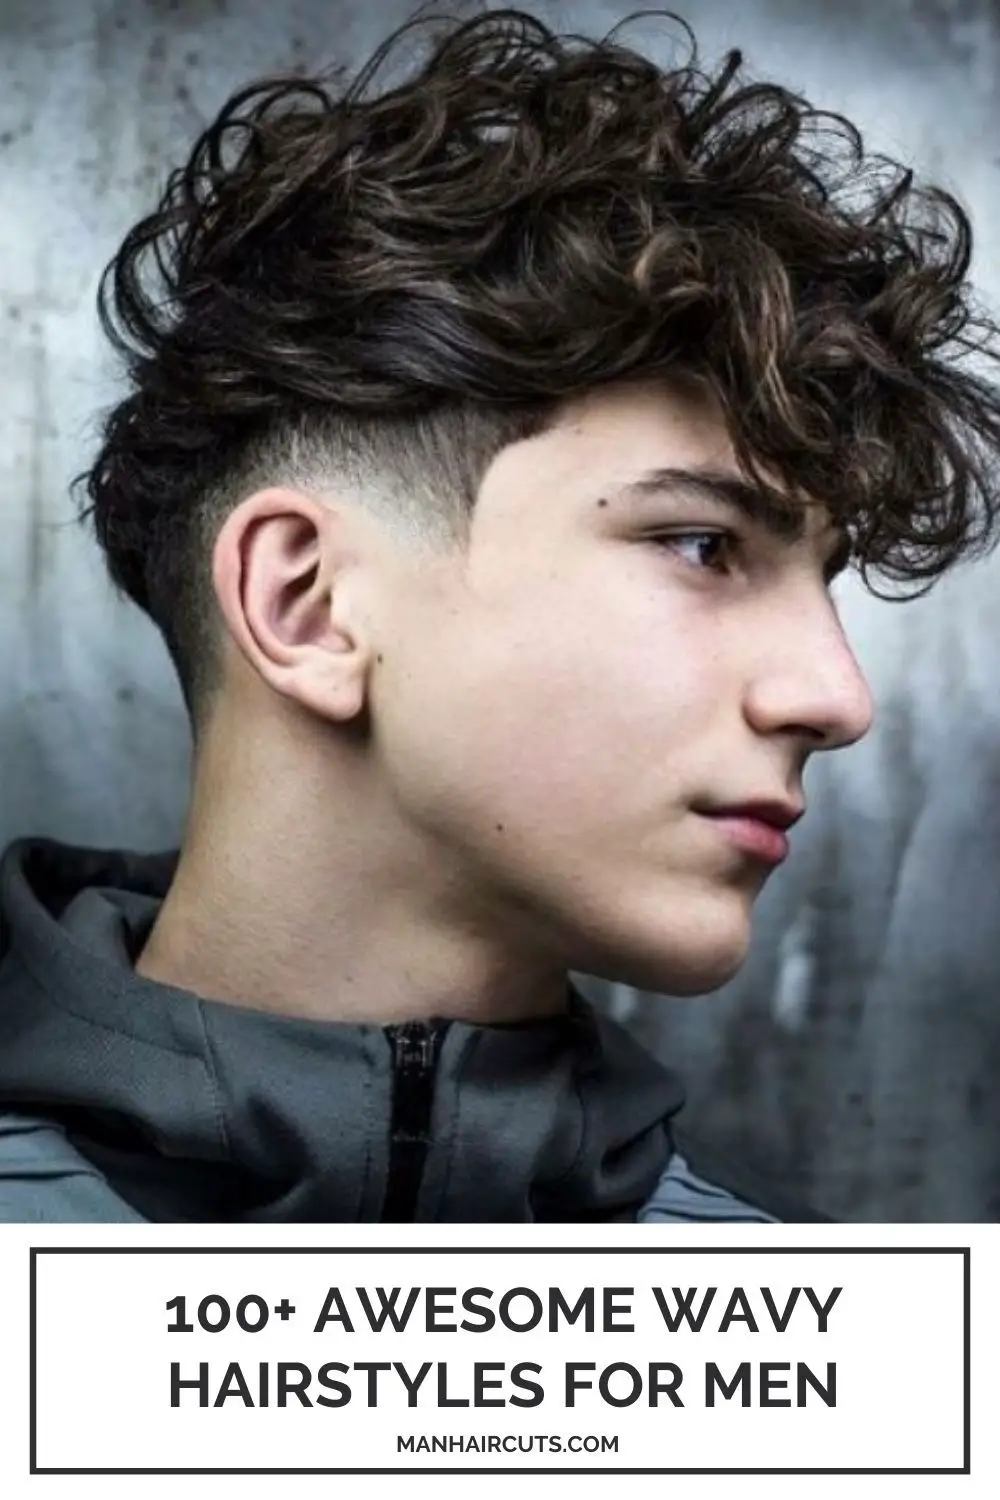 50-hairstyles-for-men-with-wavy-hair-trending-this-year Wavy Quiff